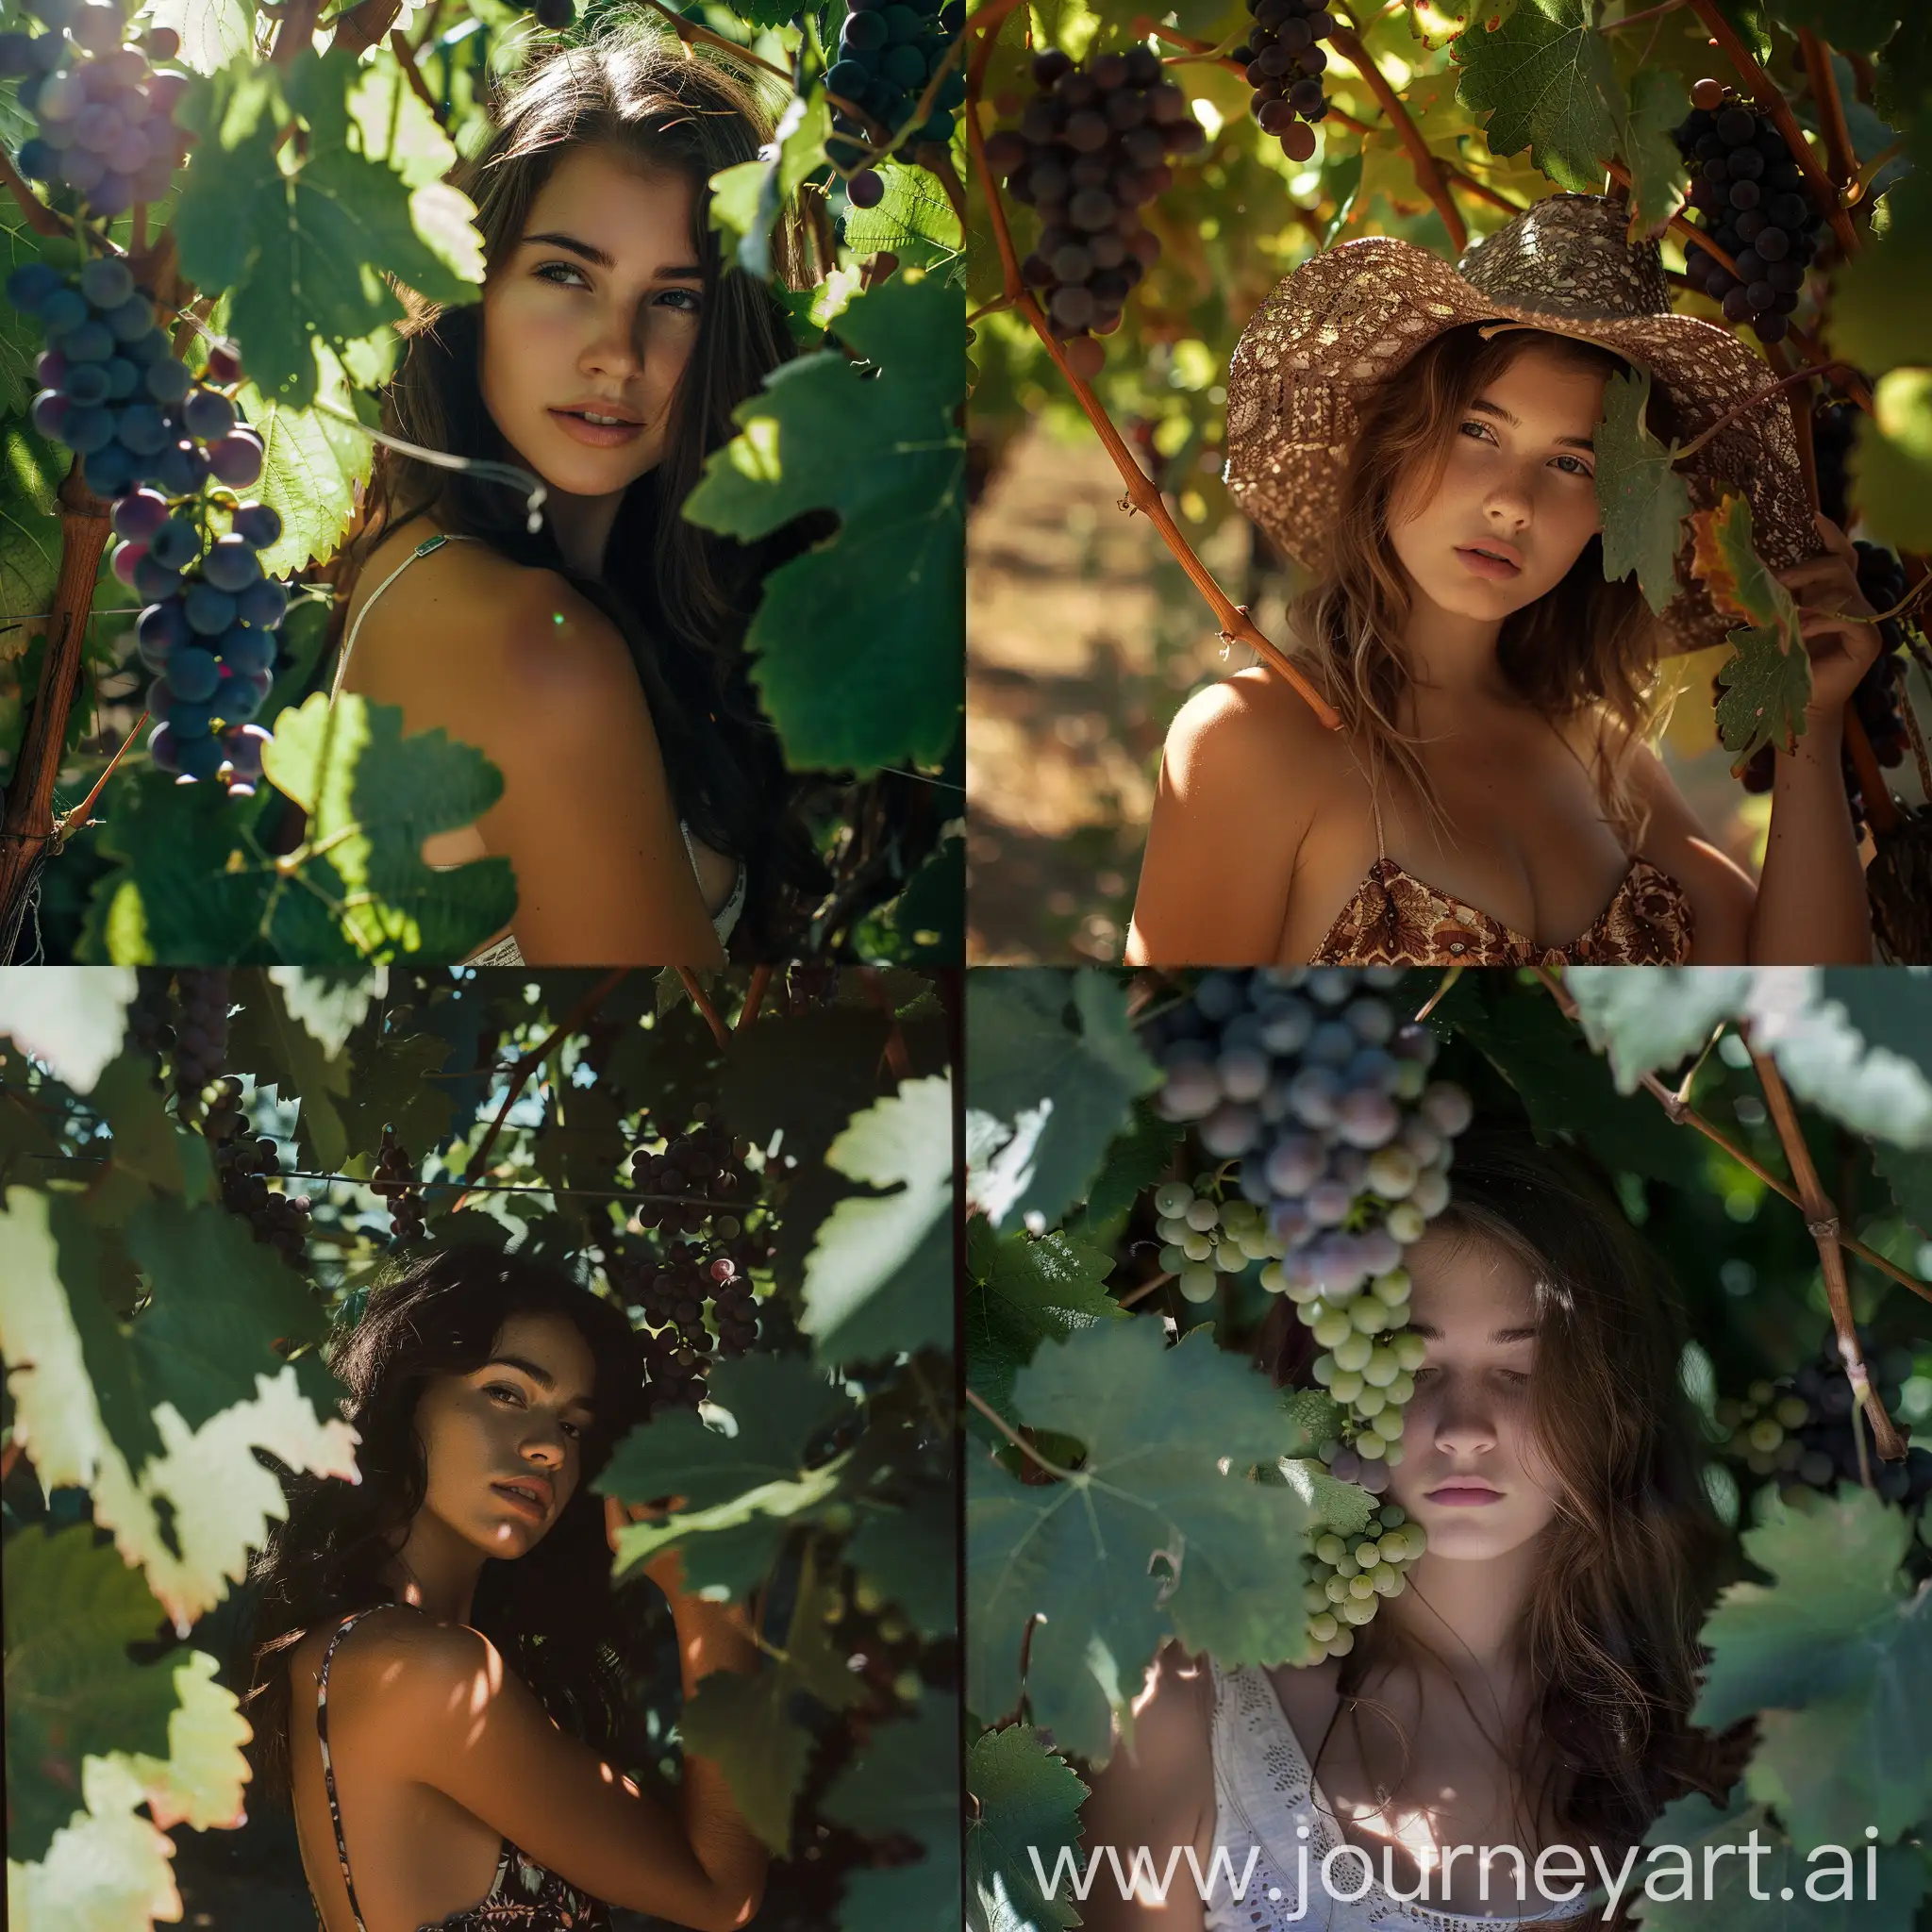 Young-Woman-Relaxing-in-the-Shade-of-a-Grapevine-on-a-Hot-Summer-Day